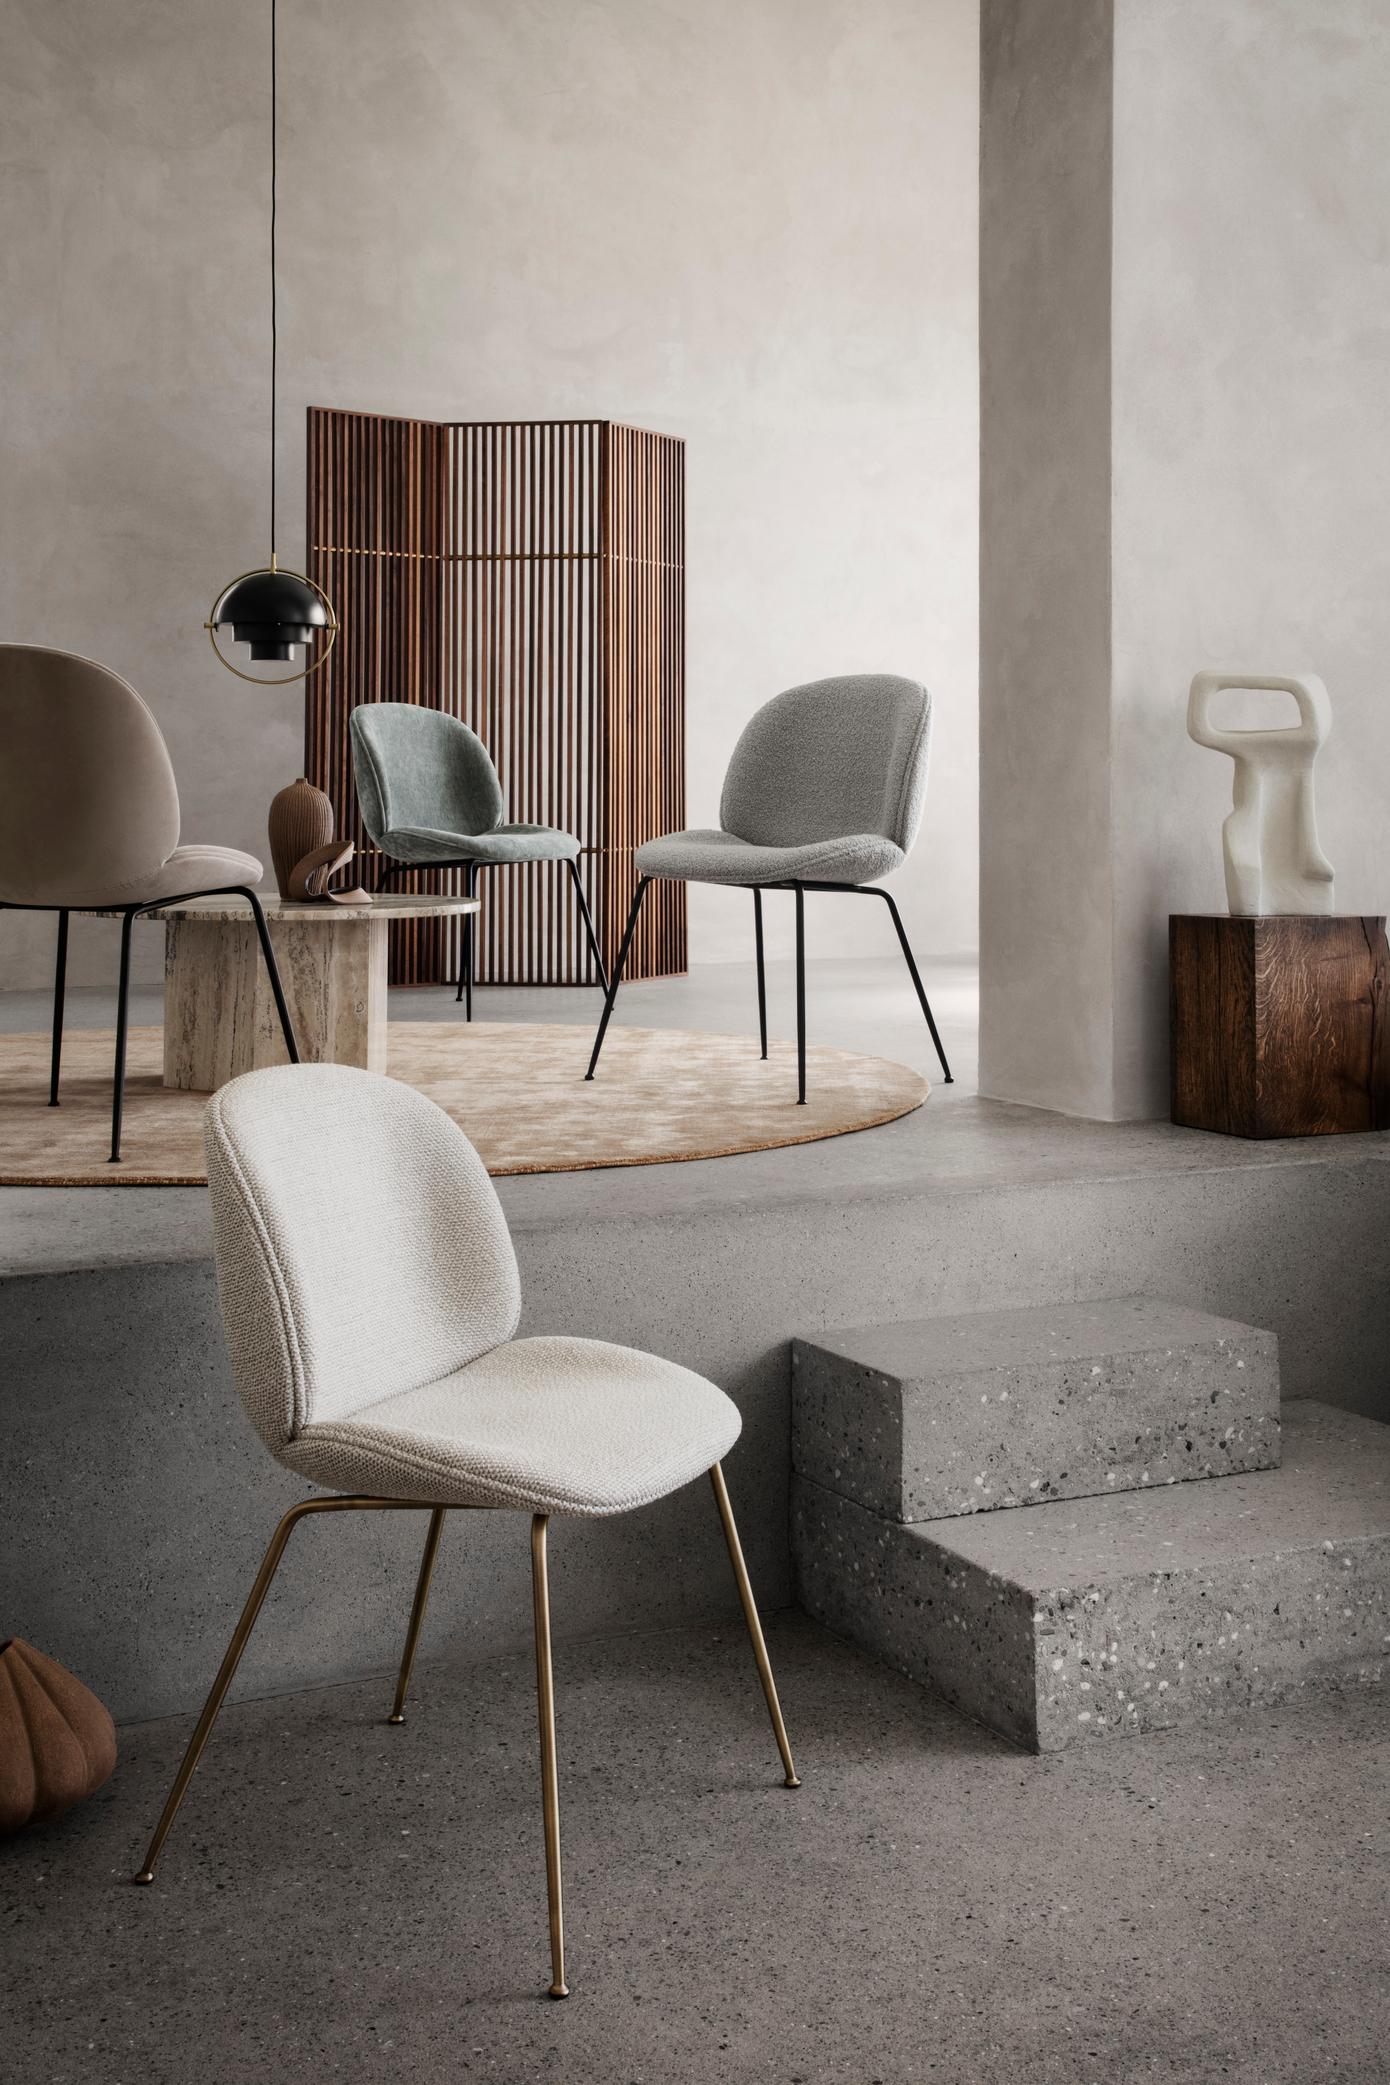 The Beetle Dining Chair has since its introduction in 2013 been well received by end-consumers as well as interior architects. 
Due to its appealing design, outstanding comfort and unique customisation possibilities, the dining chair can be seen in